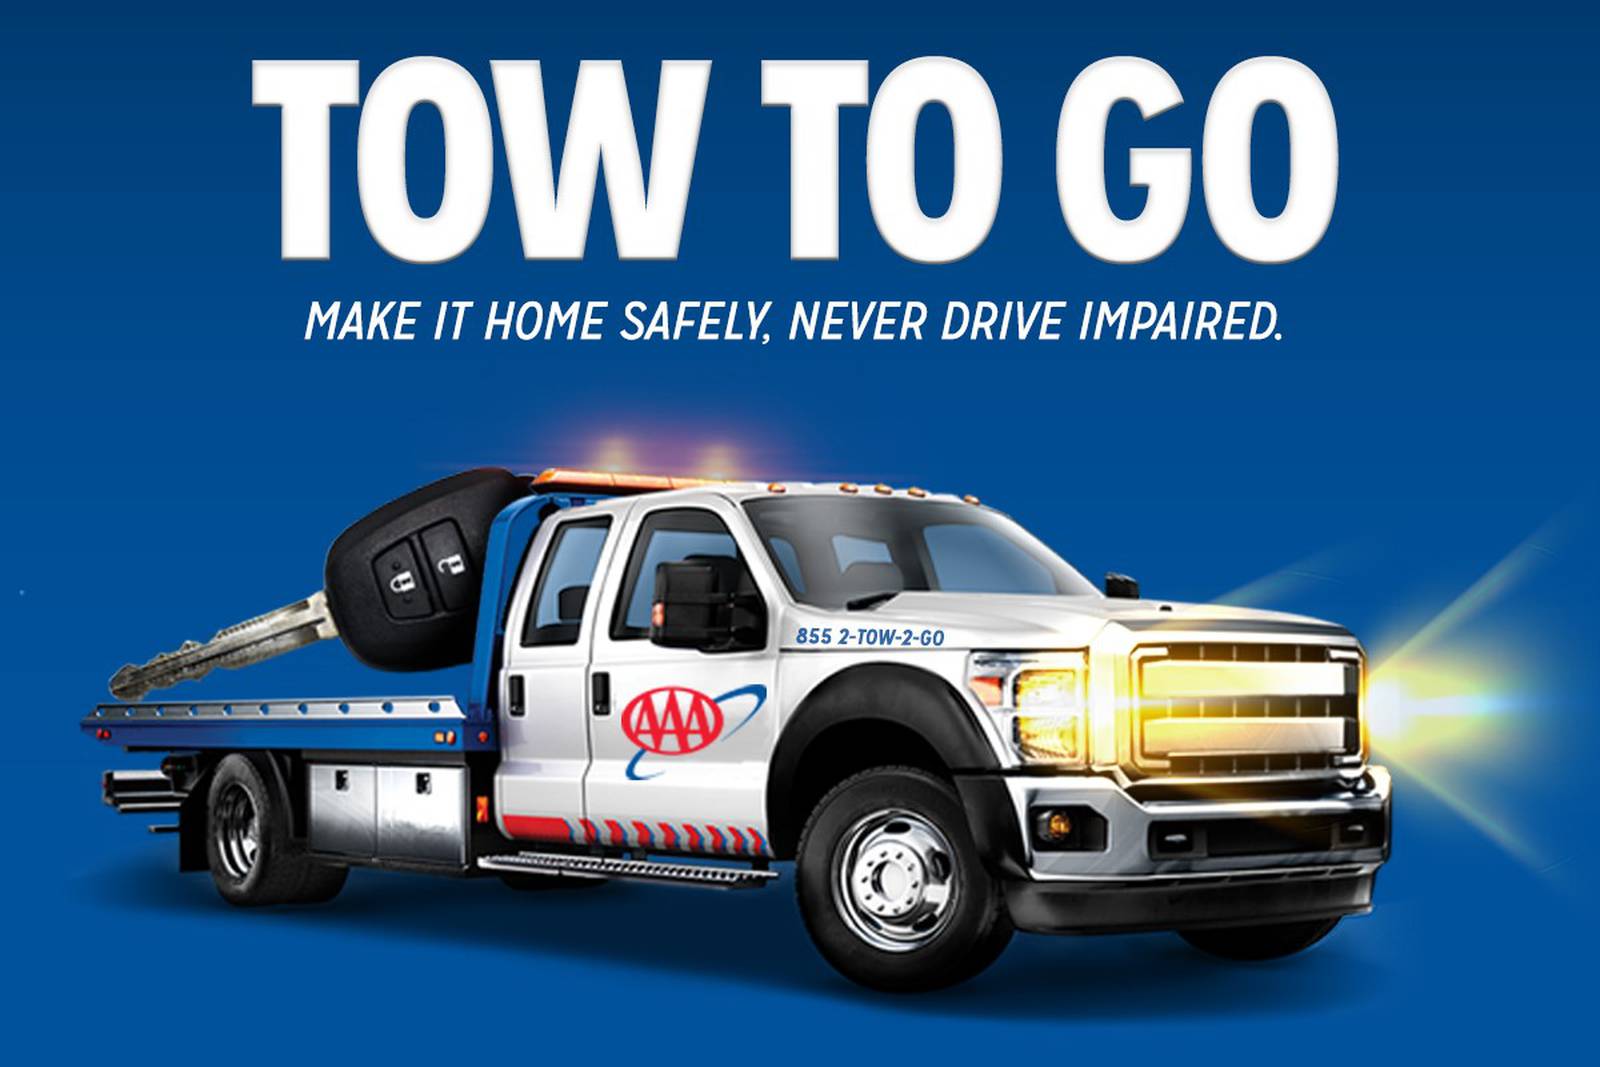 AAA’s TowToGo Program offers free rides to anyone during Memorial Day